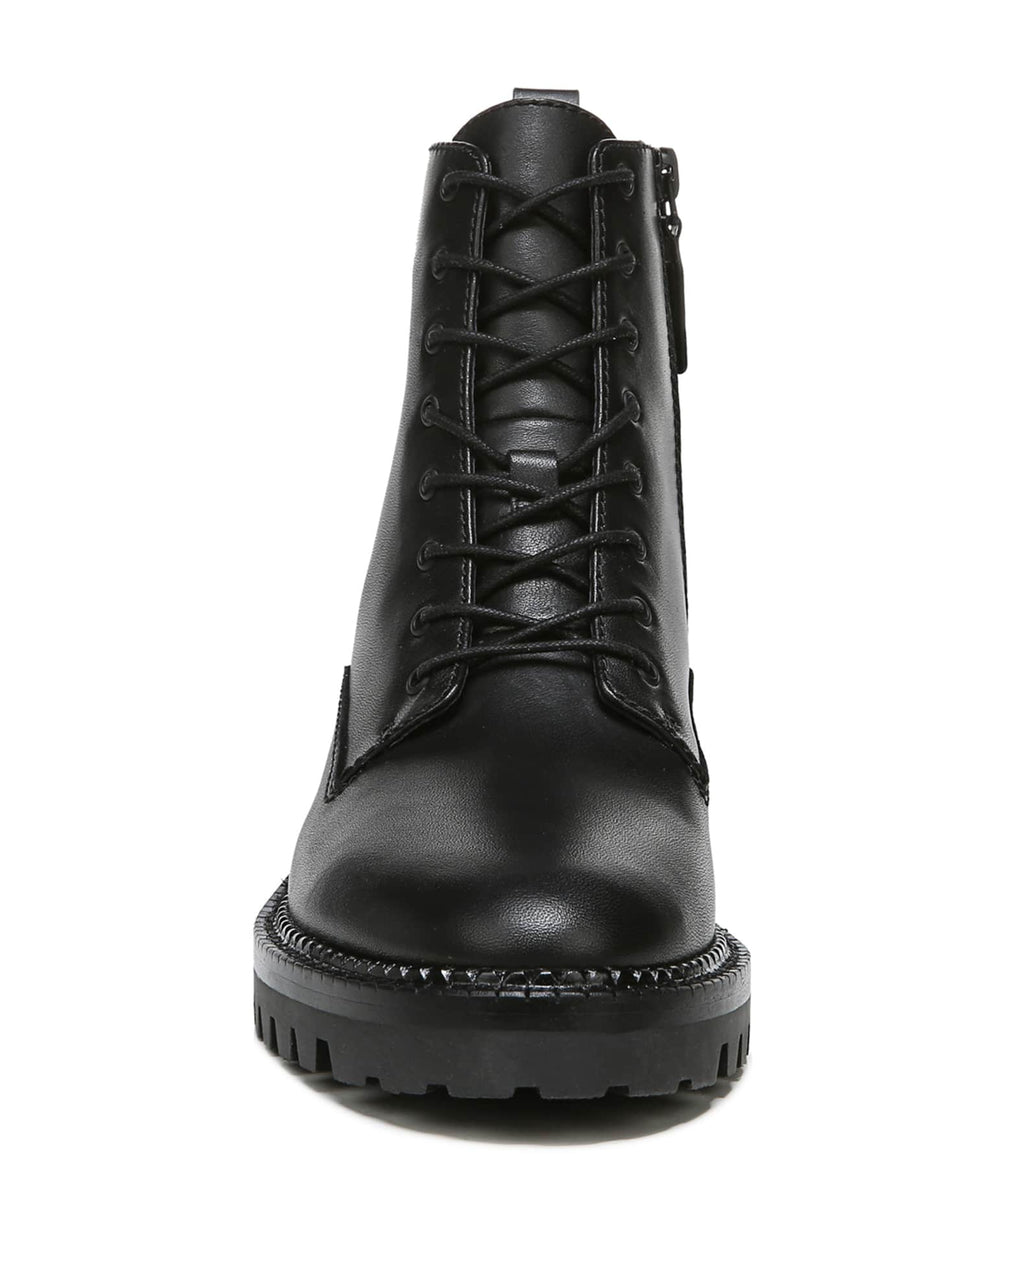 Vince Cabria Lug-Sole Leather Water-Repellant Combat Boots